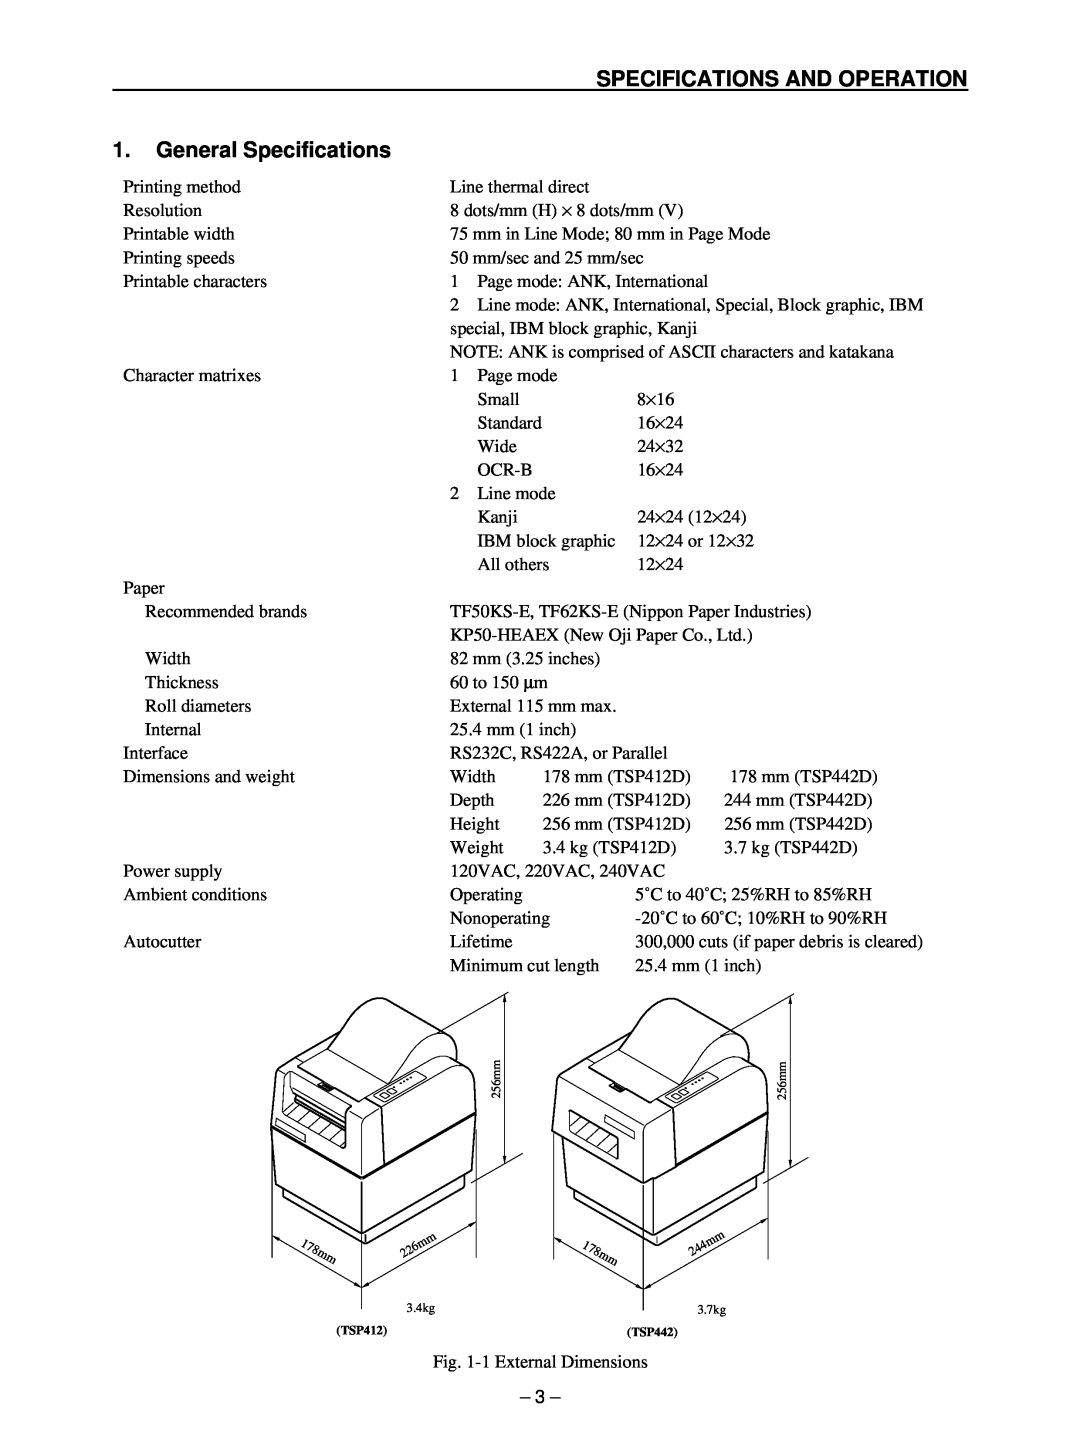 Star Micronics TSP400 technical manual SPECIFICATIONS AND OPERATION 1. General Specifications, 178mm 